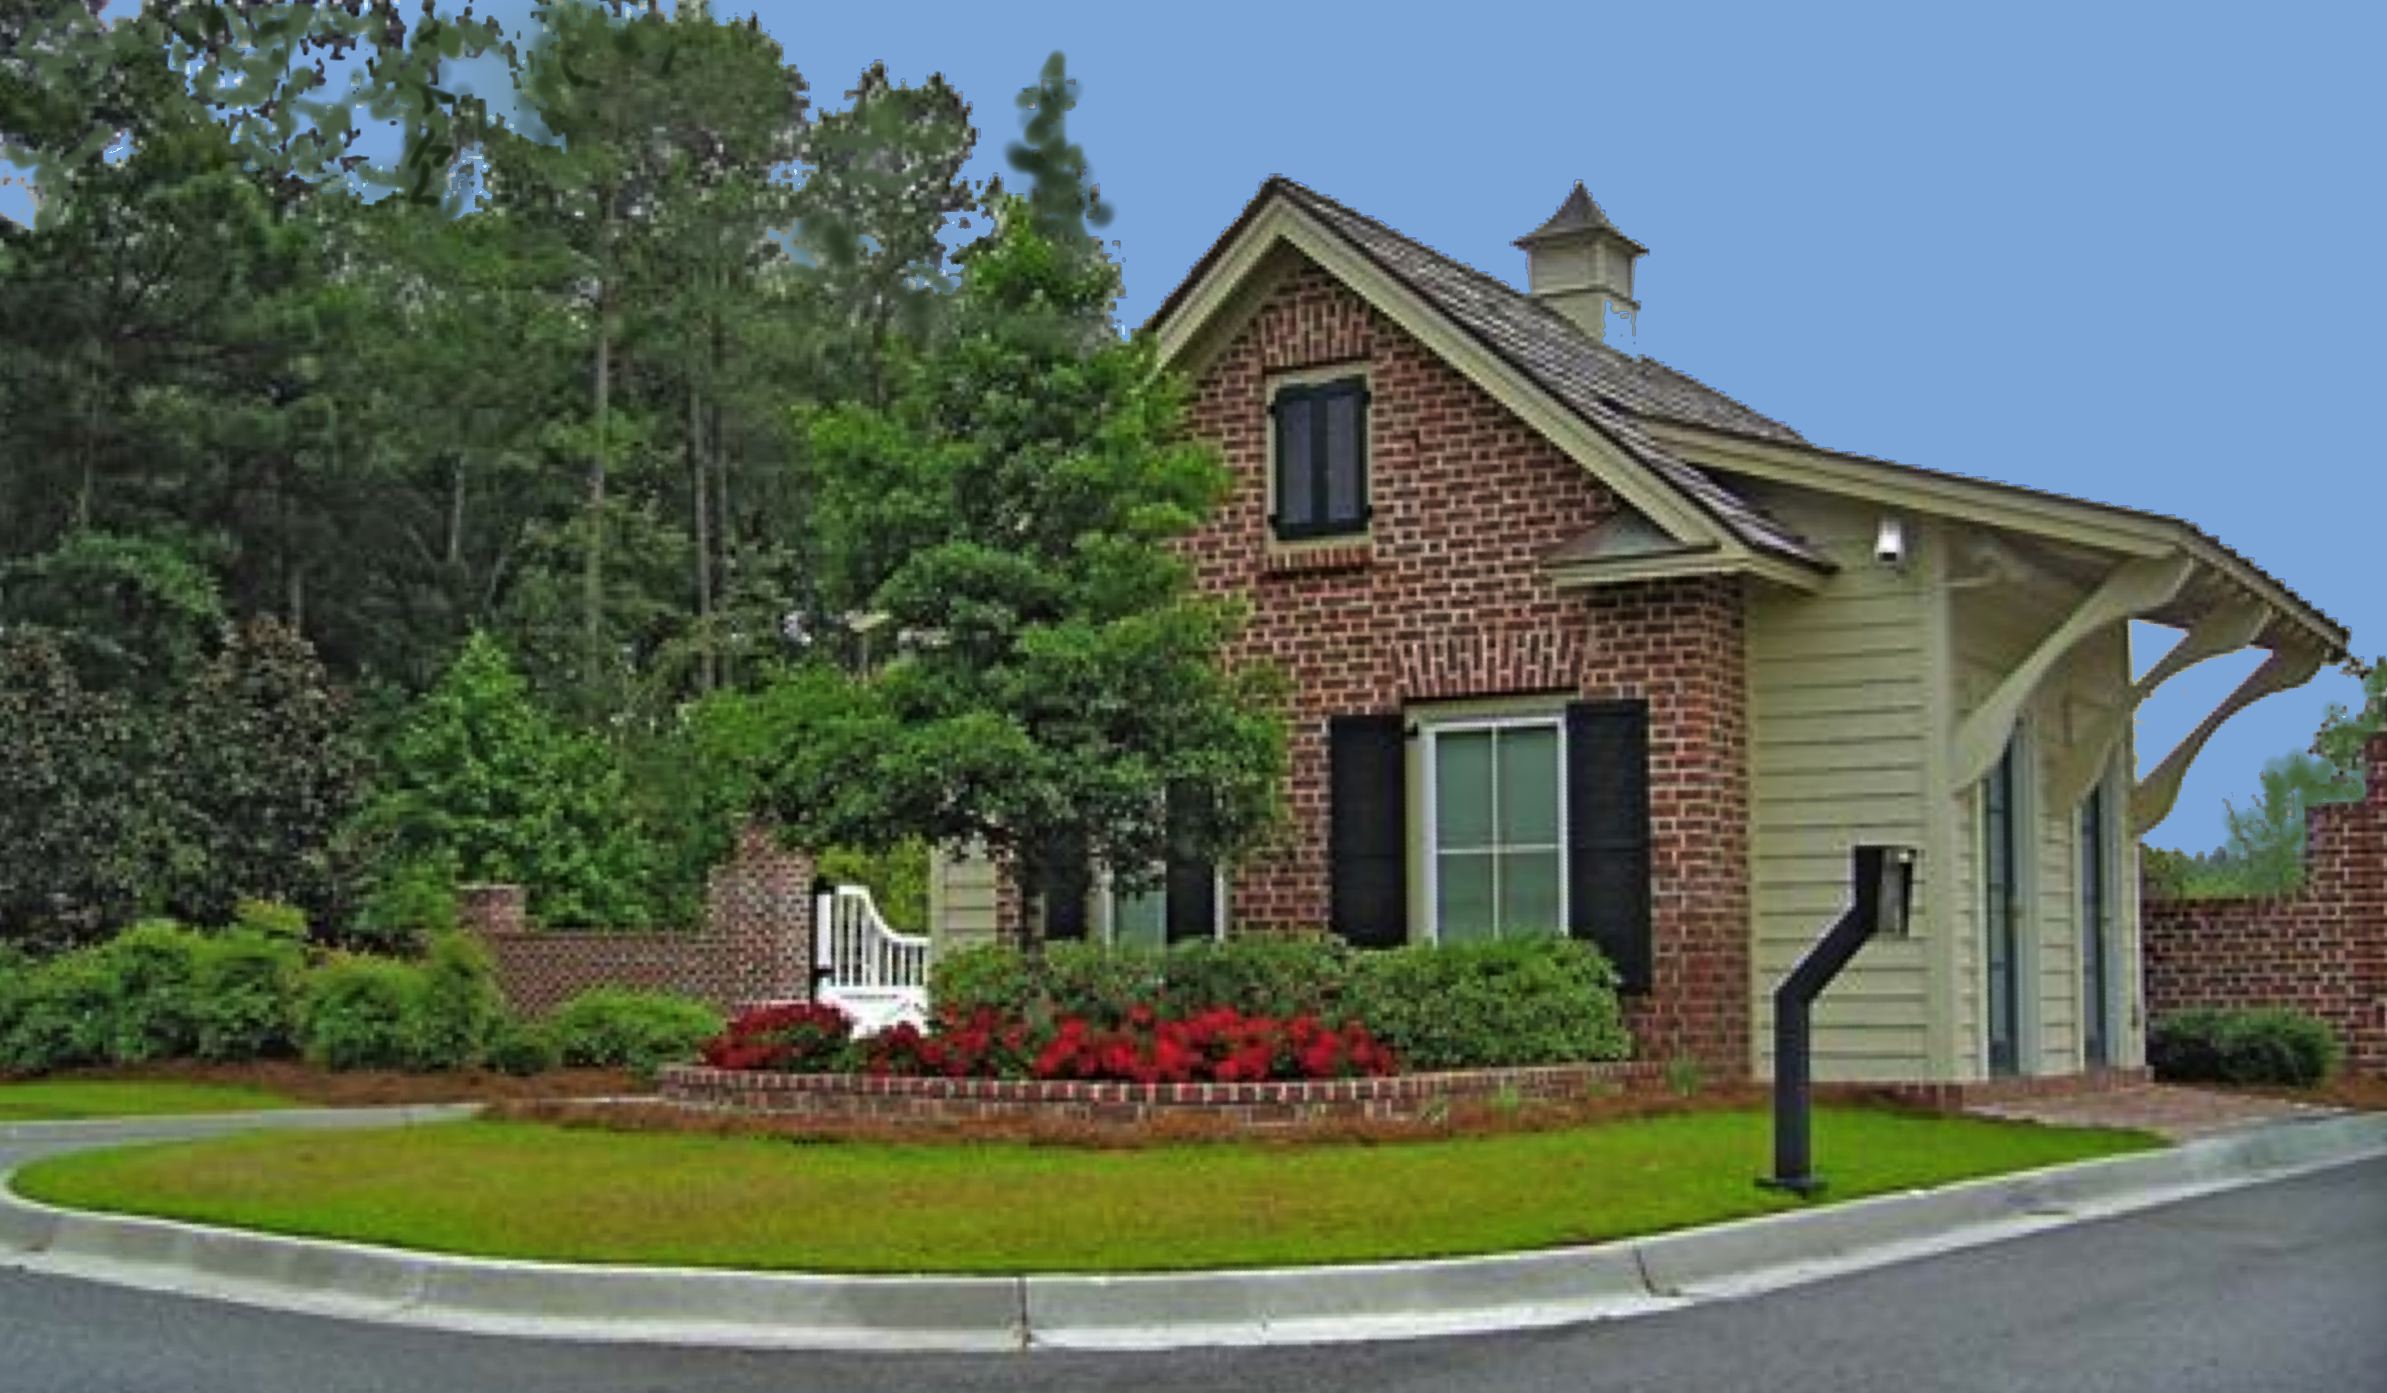 The gated entrance to Forest Lakes in Pooler, GA